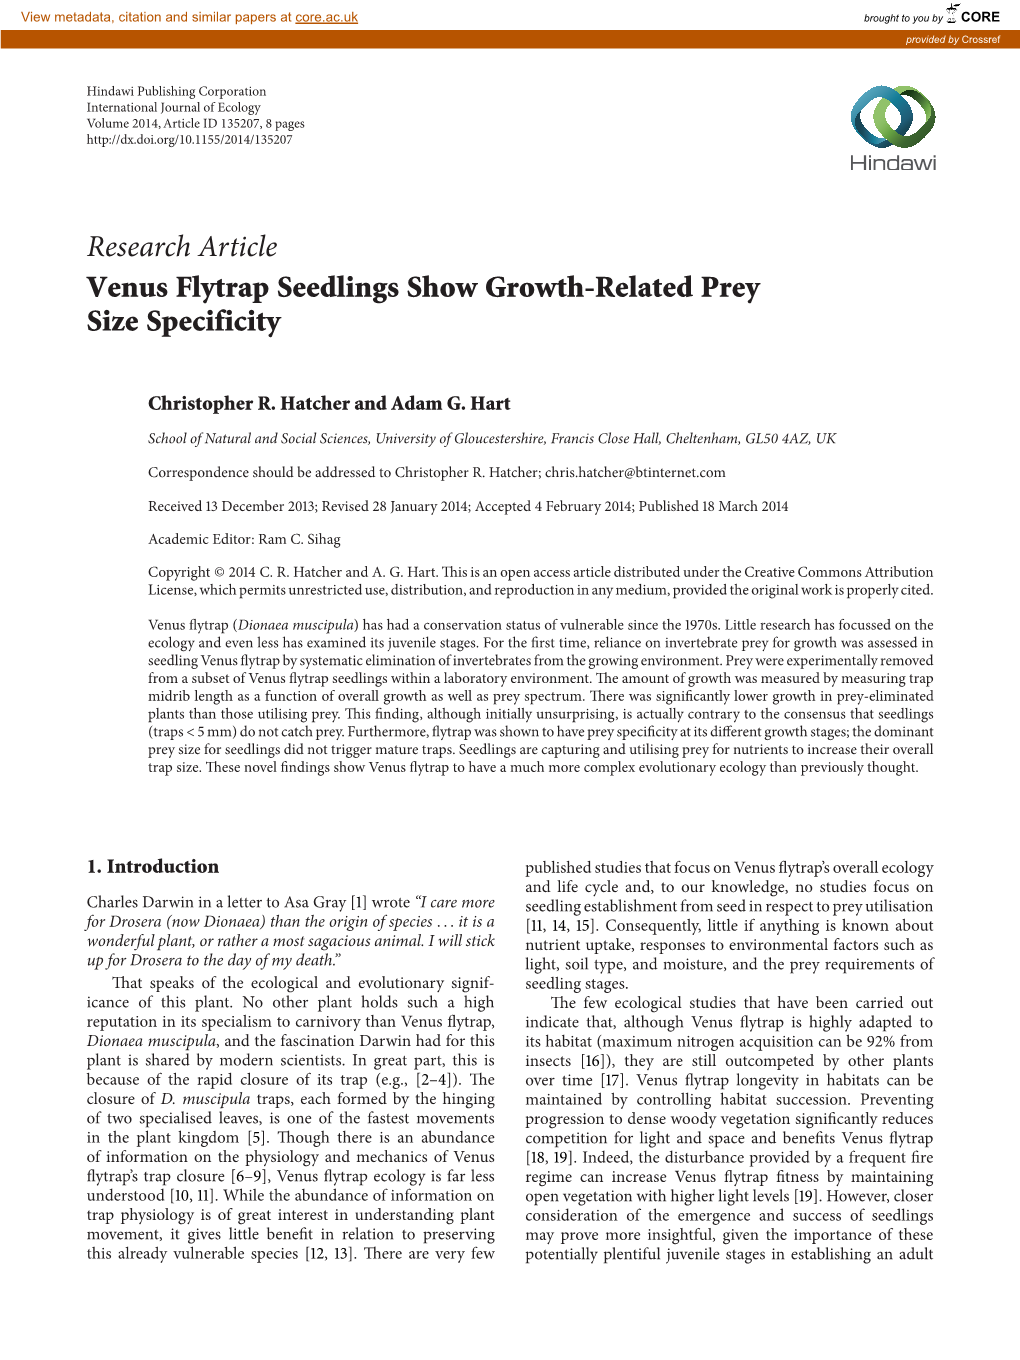 Research Article Venus Flytrap Seedlings Show Growth-Related Prey Size Specificity